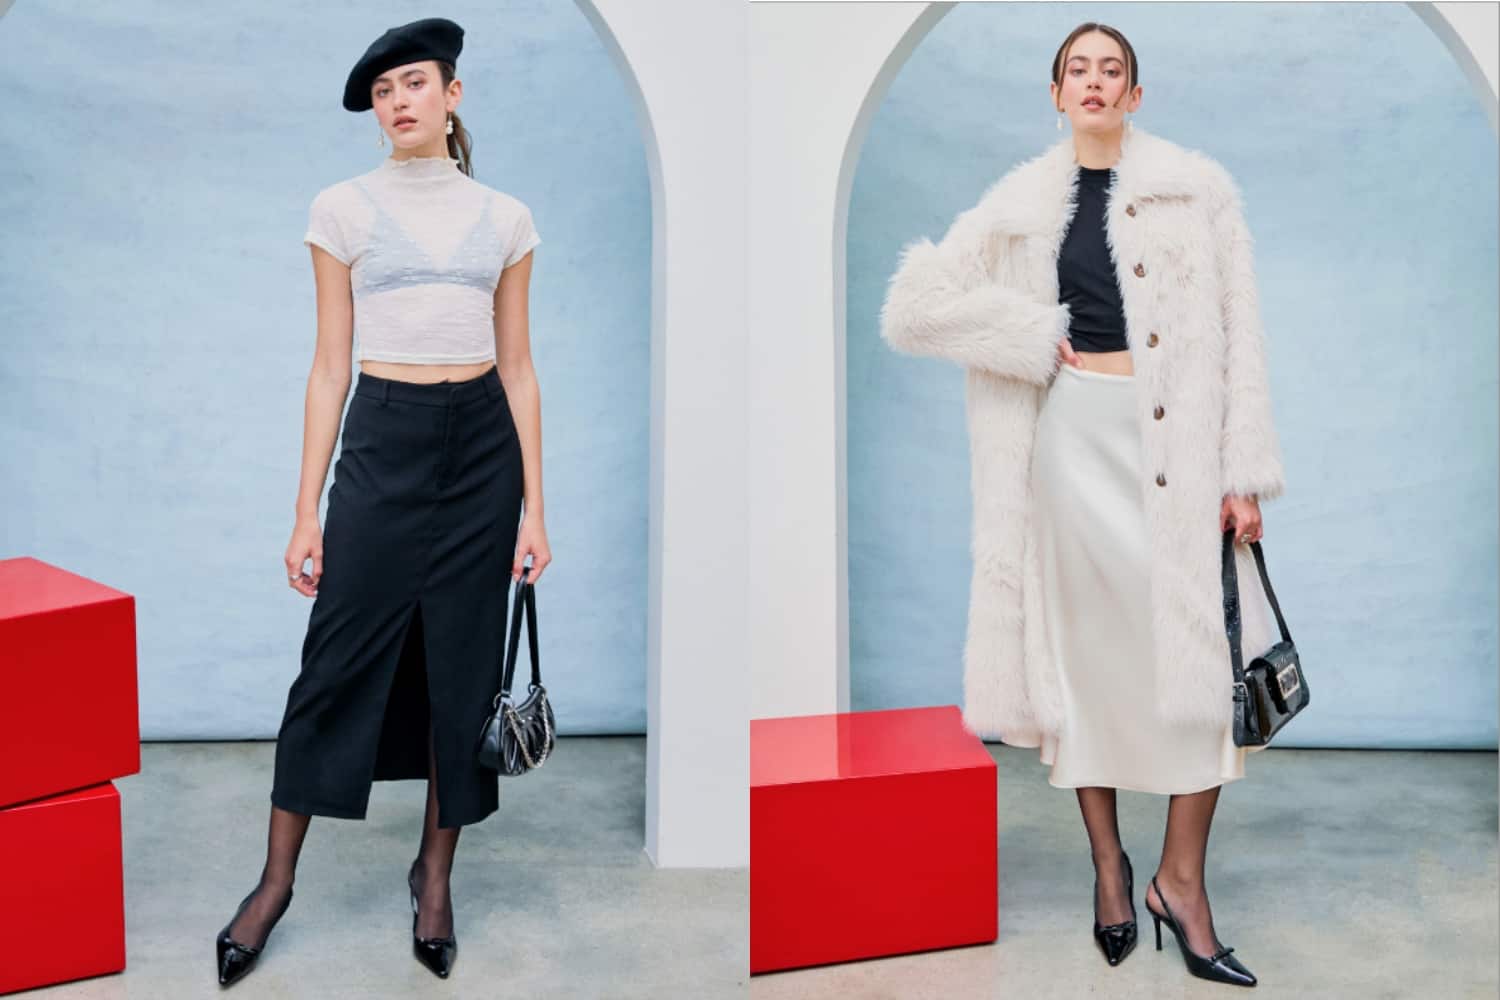 5 Cute Looks from the Cider X Mimi Cuttrell NYE Edit